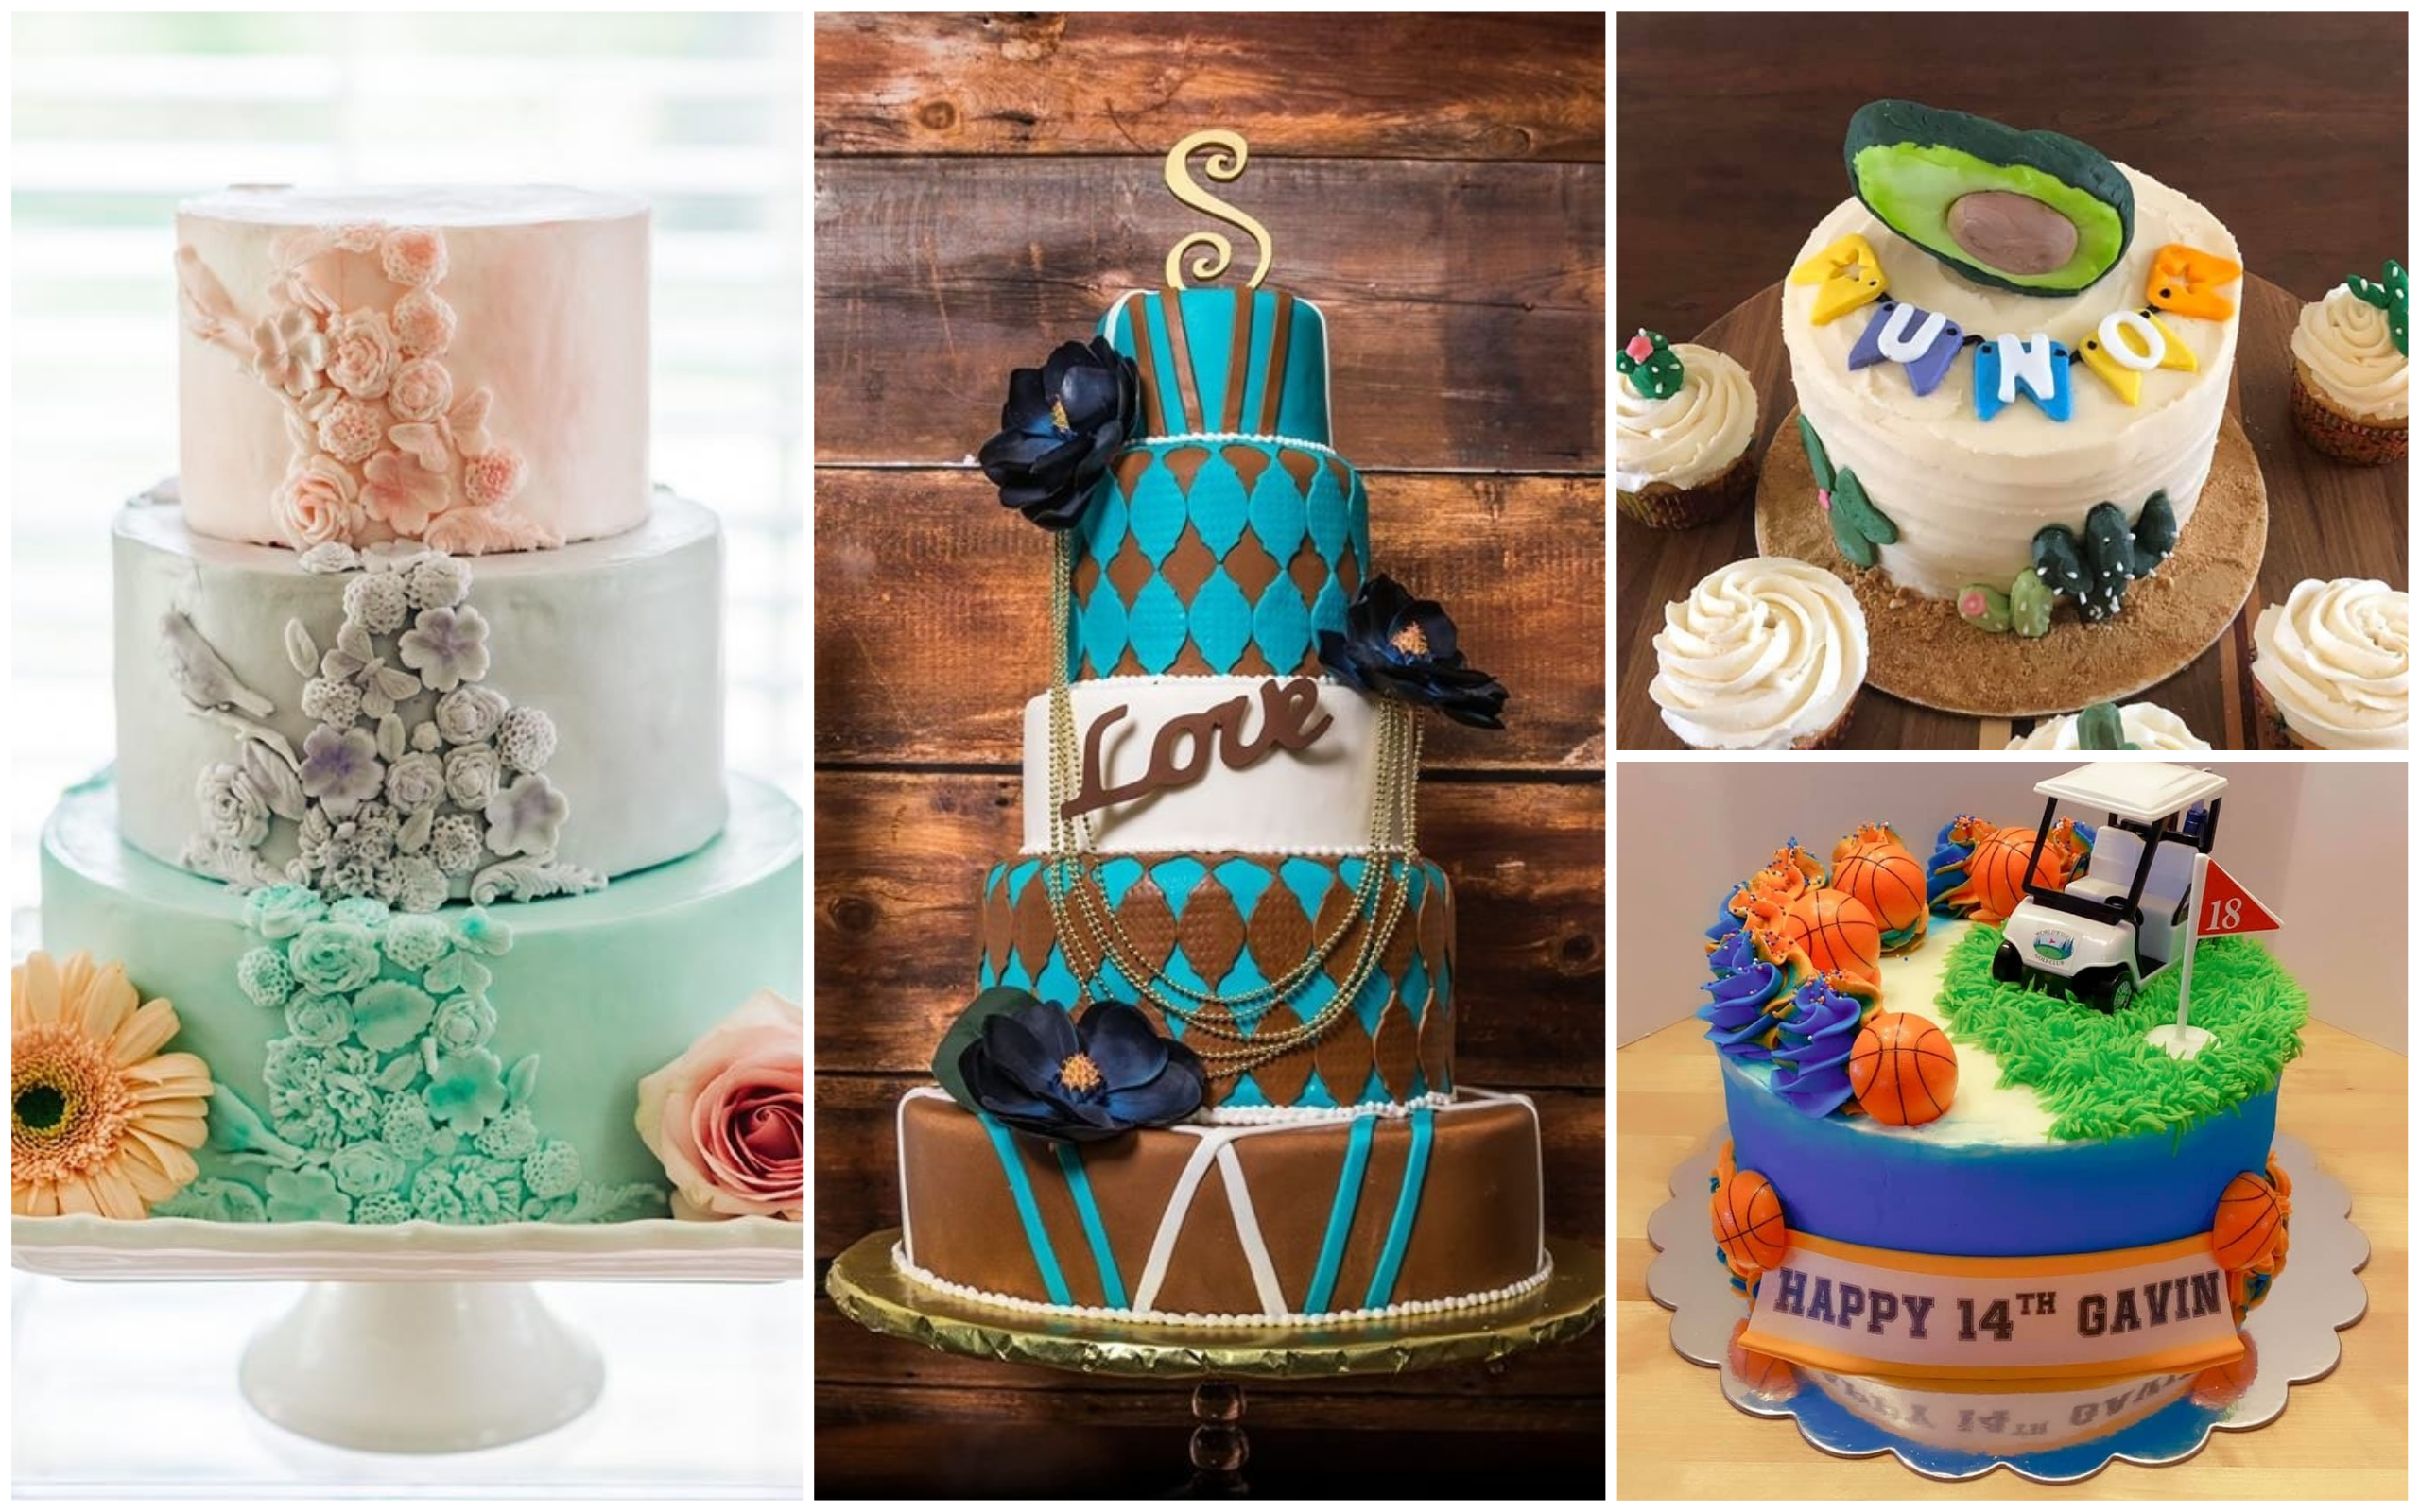 Top Online Professional Cake Making Courses » Bakedemy